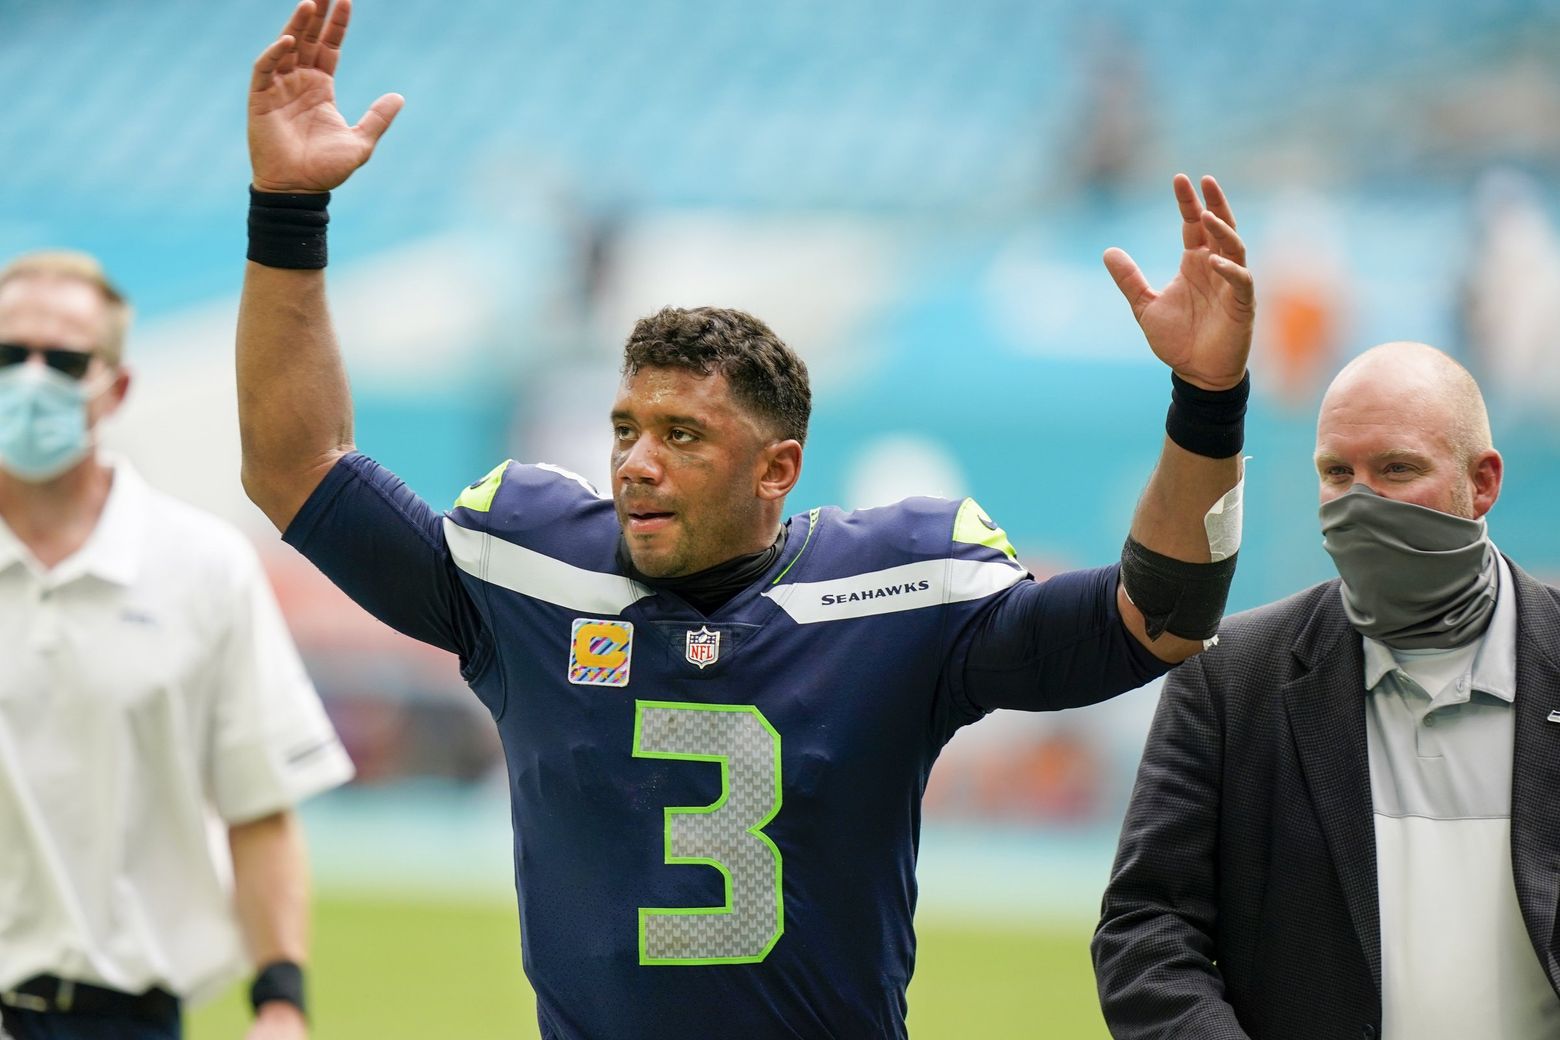 The key to it all is Russell': The Seahawks are trusting Russell Wilson and  being more aggressive | The Seattle Times